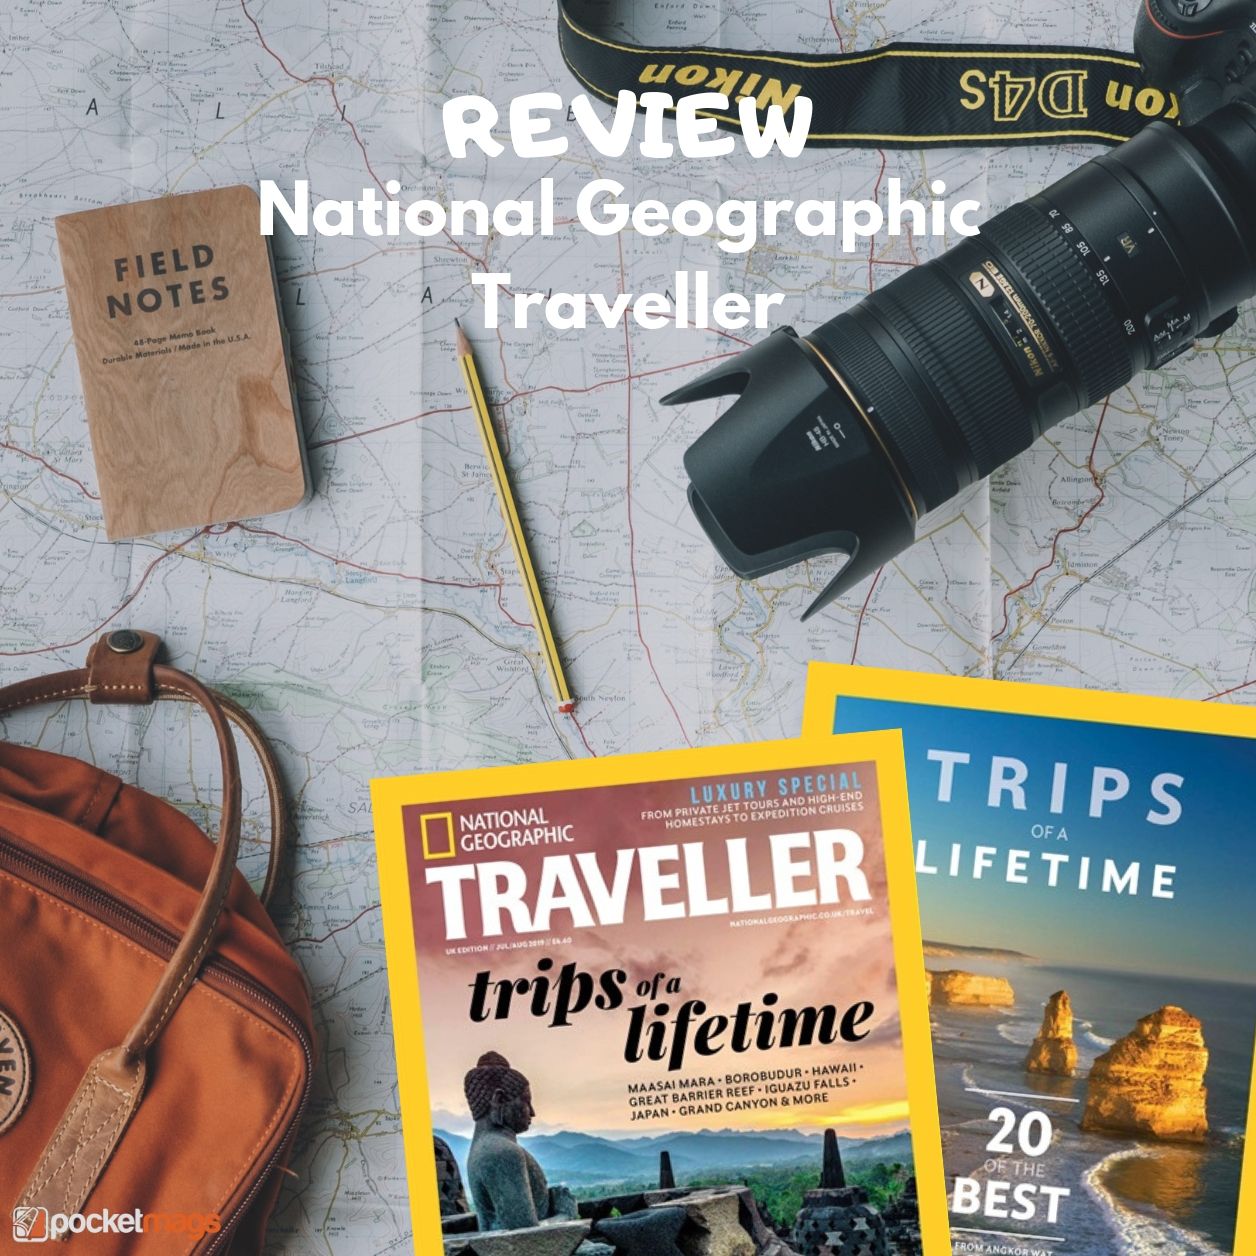 National Geographic Traveller Magazine Review